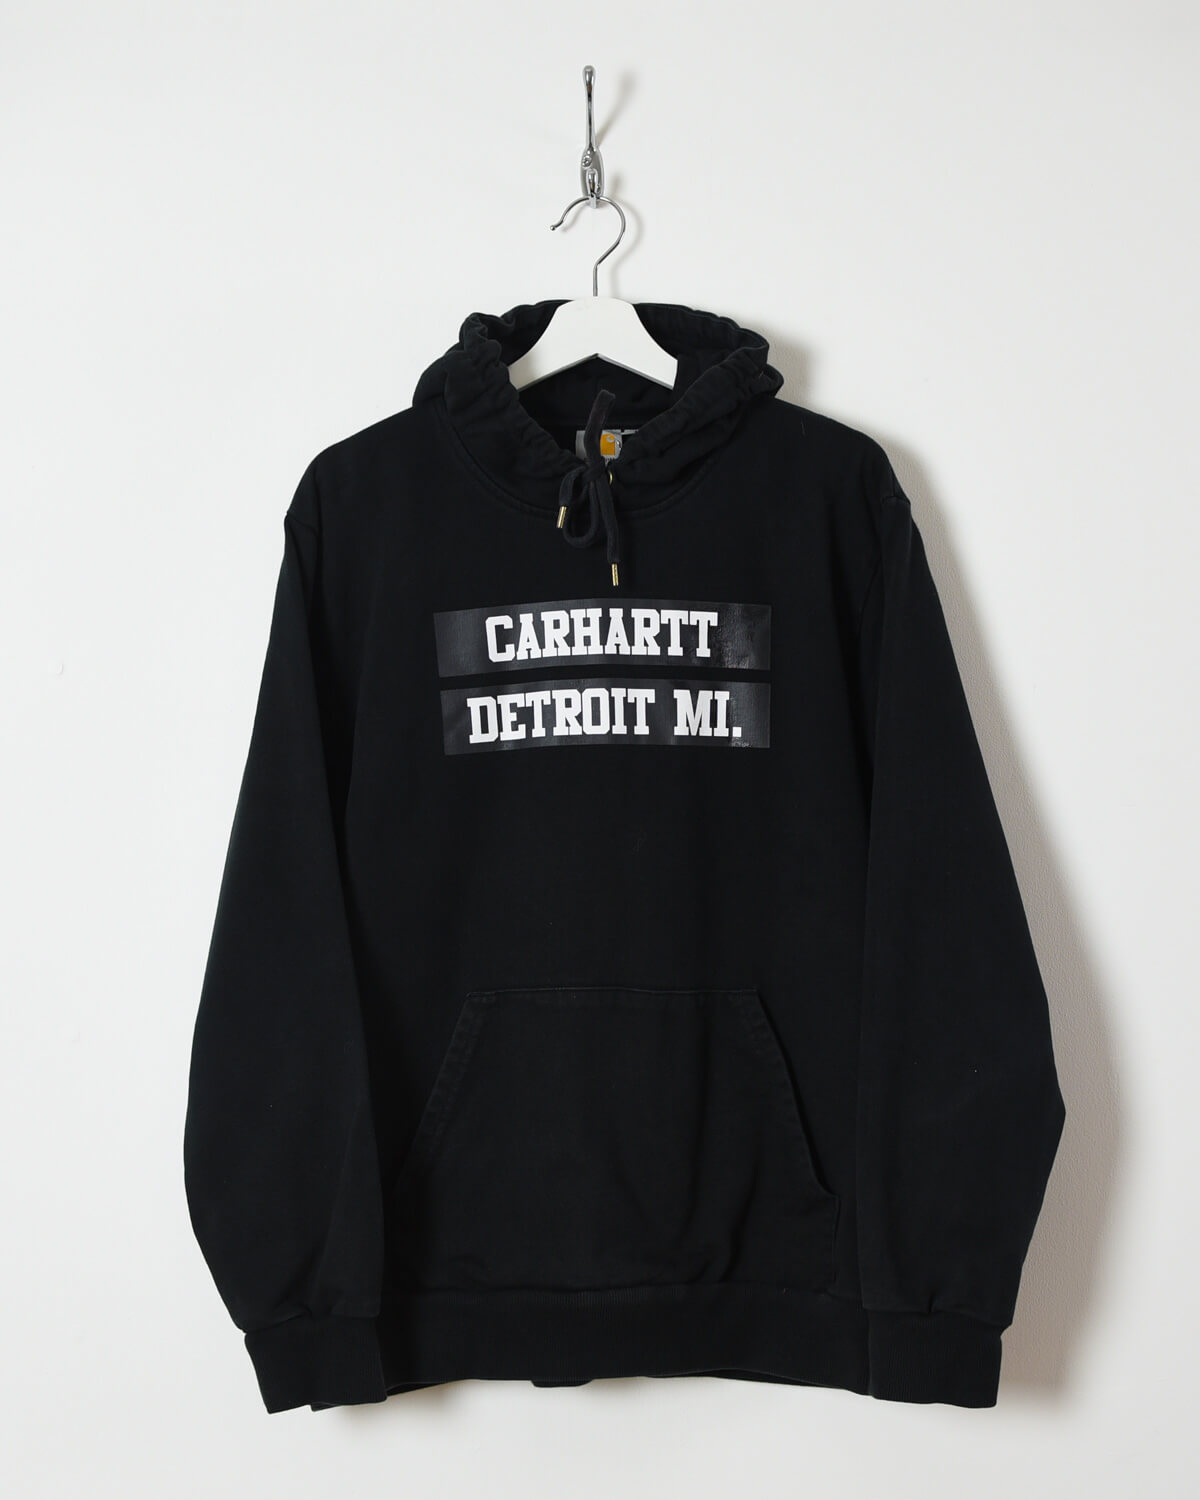 Carhartt Detroit MI. Hoodie - Large - Domno Vintage 90s, 80s, 00s Retro and Vintage Clothing 